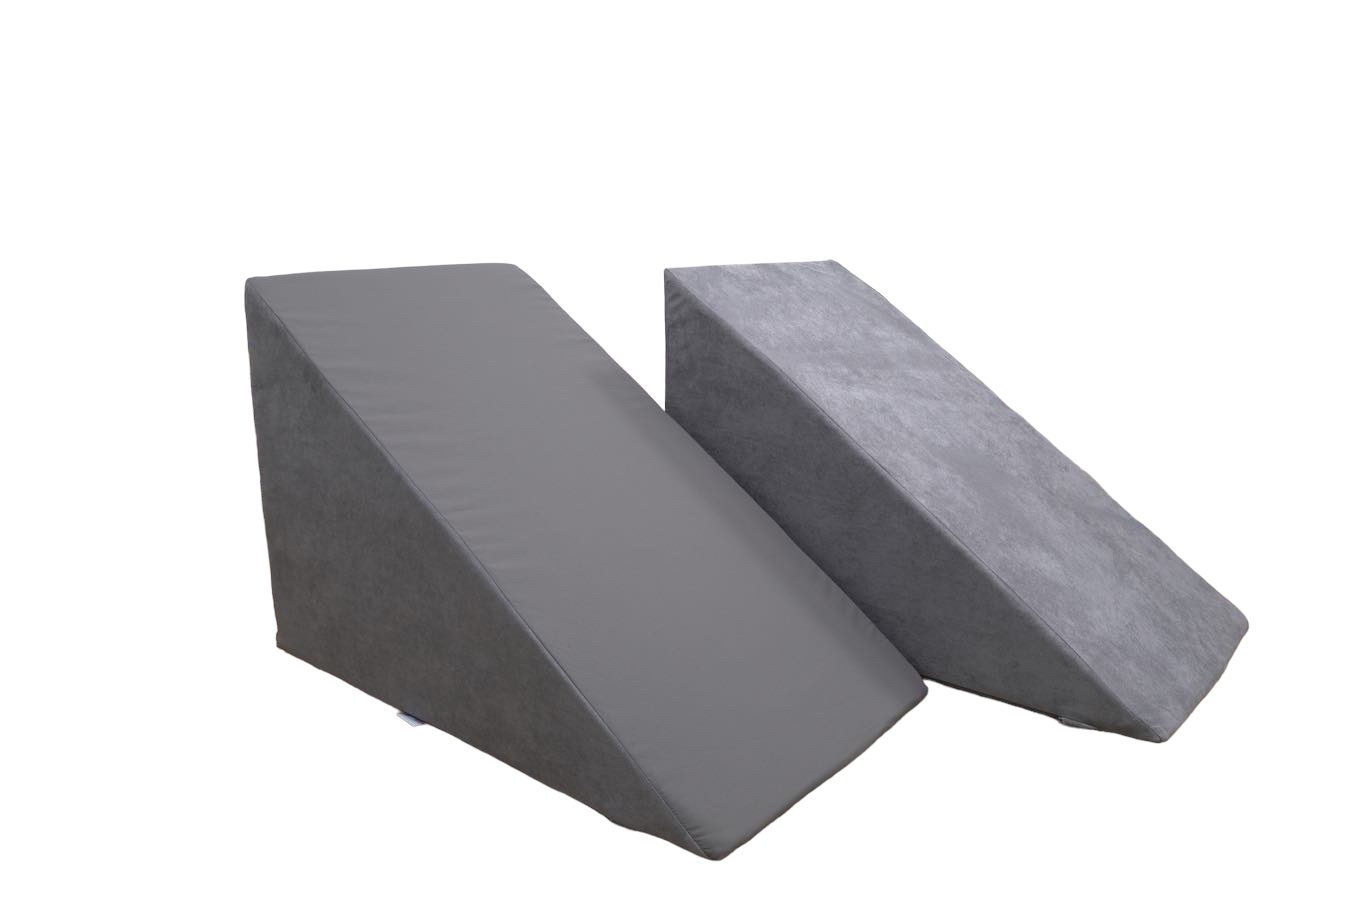 Epic Climb & Slide Wedges (set of 2 with waterproof liners)